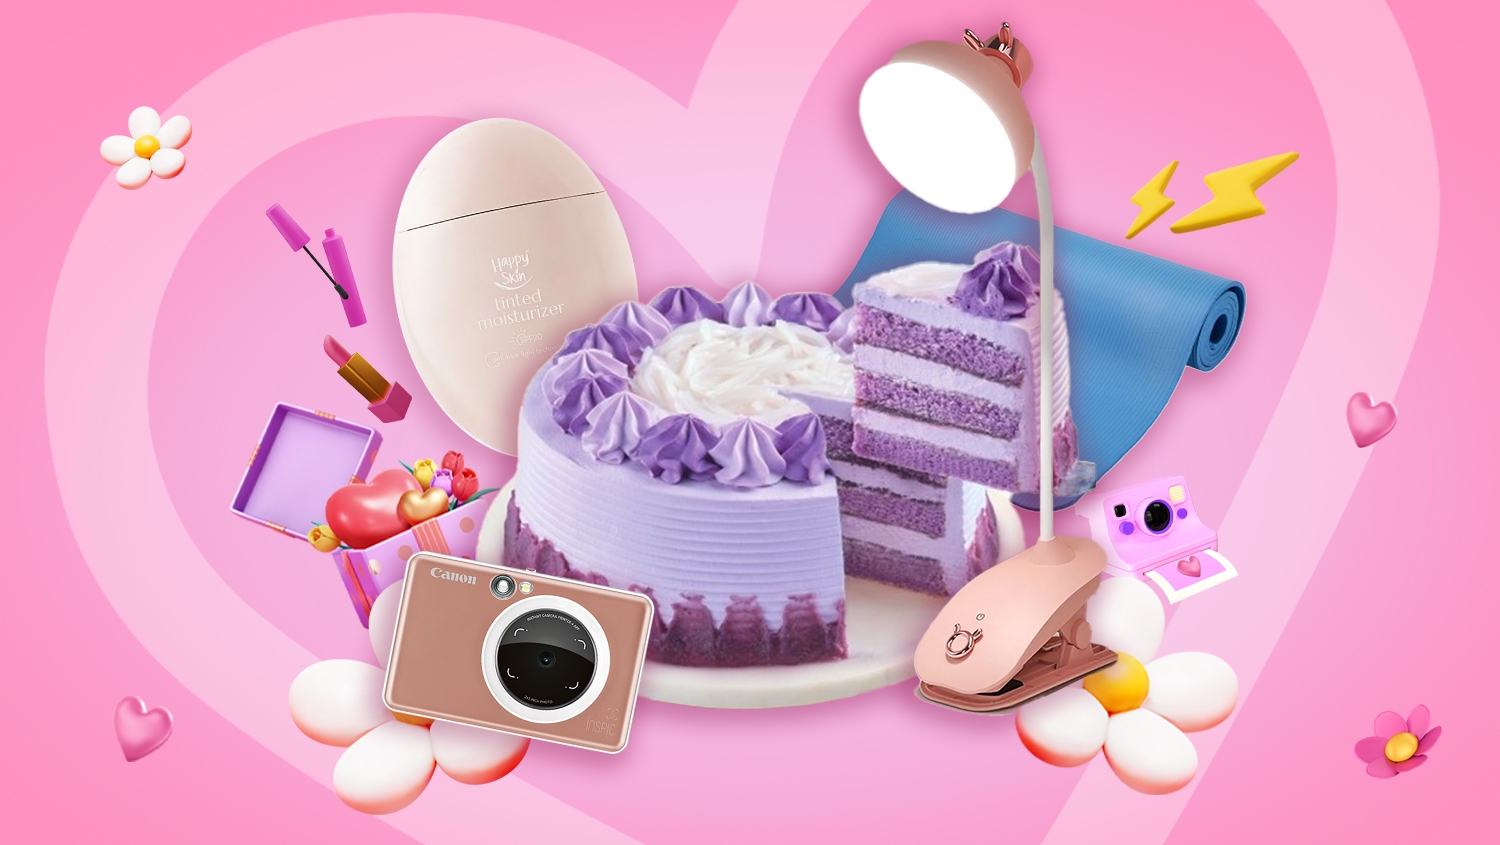 The Ultimate Mom-tastic Gift Guide: Find the Perfect Mother’s Day Present!